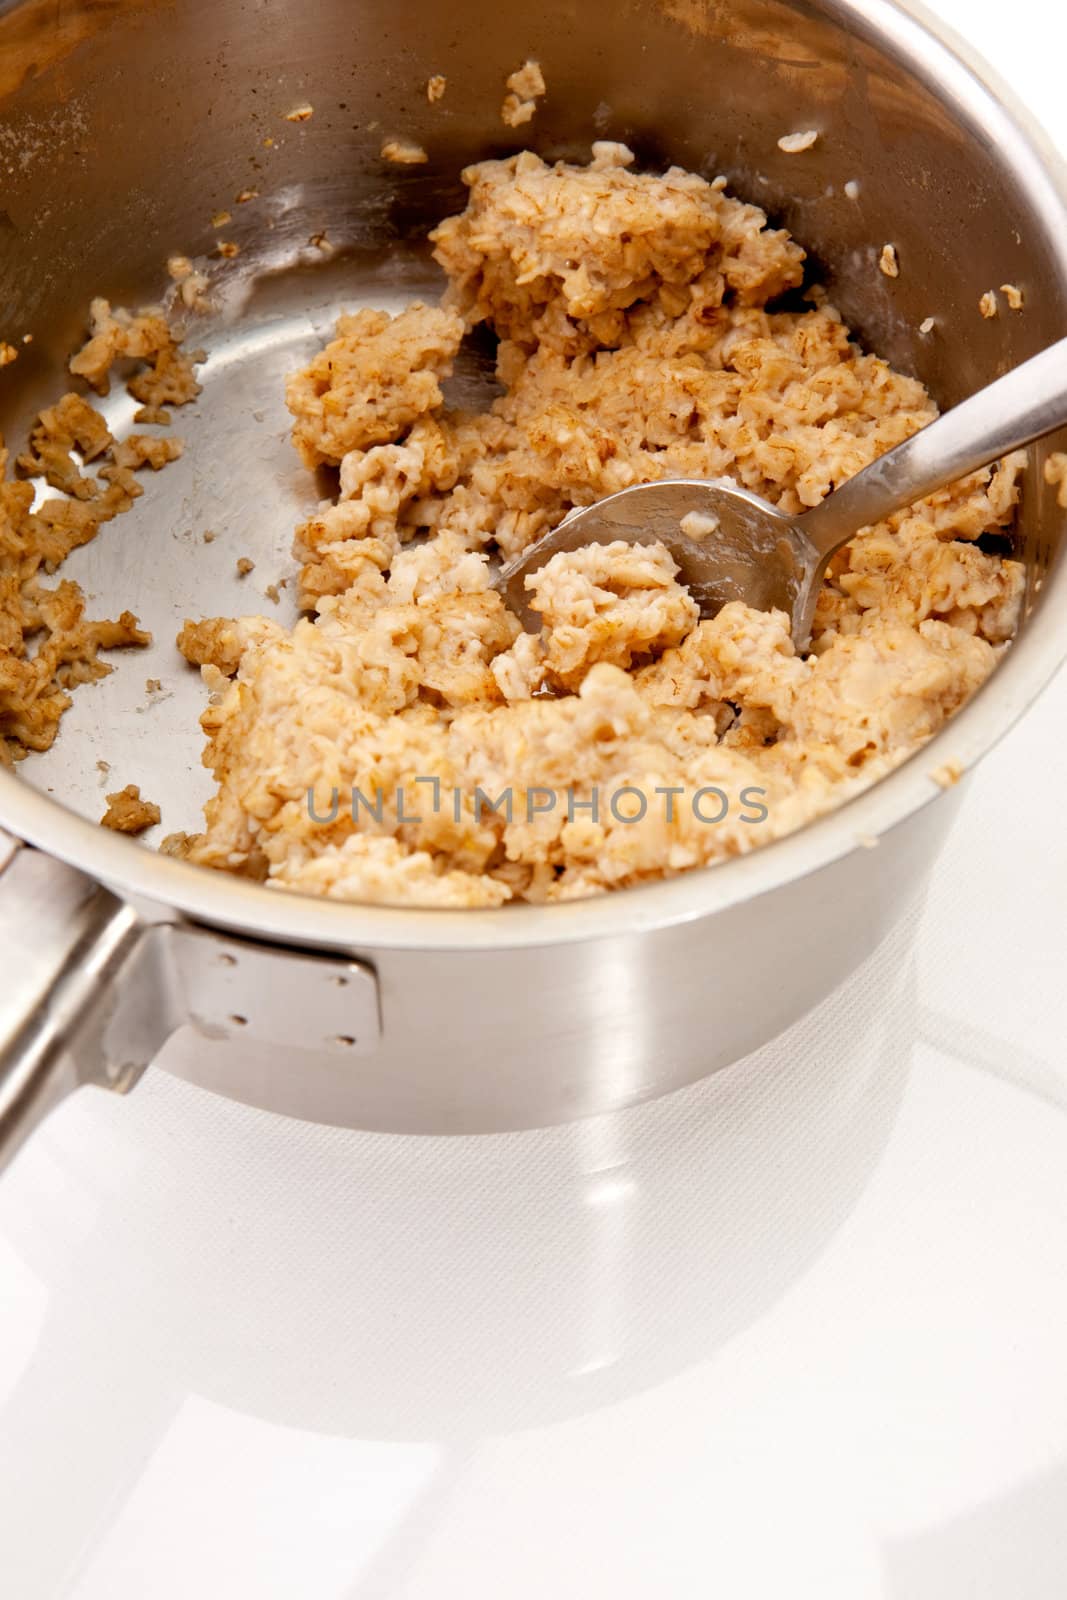 A pot of old cold porridge on a reflective white background